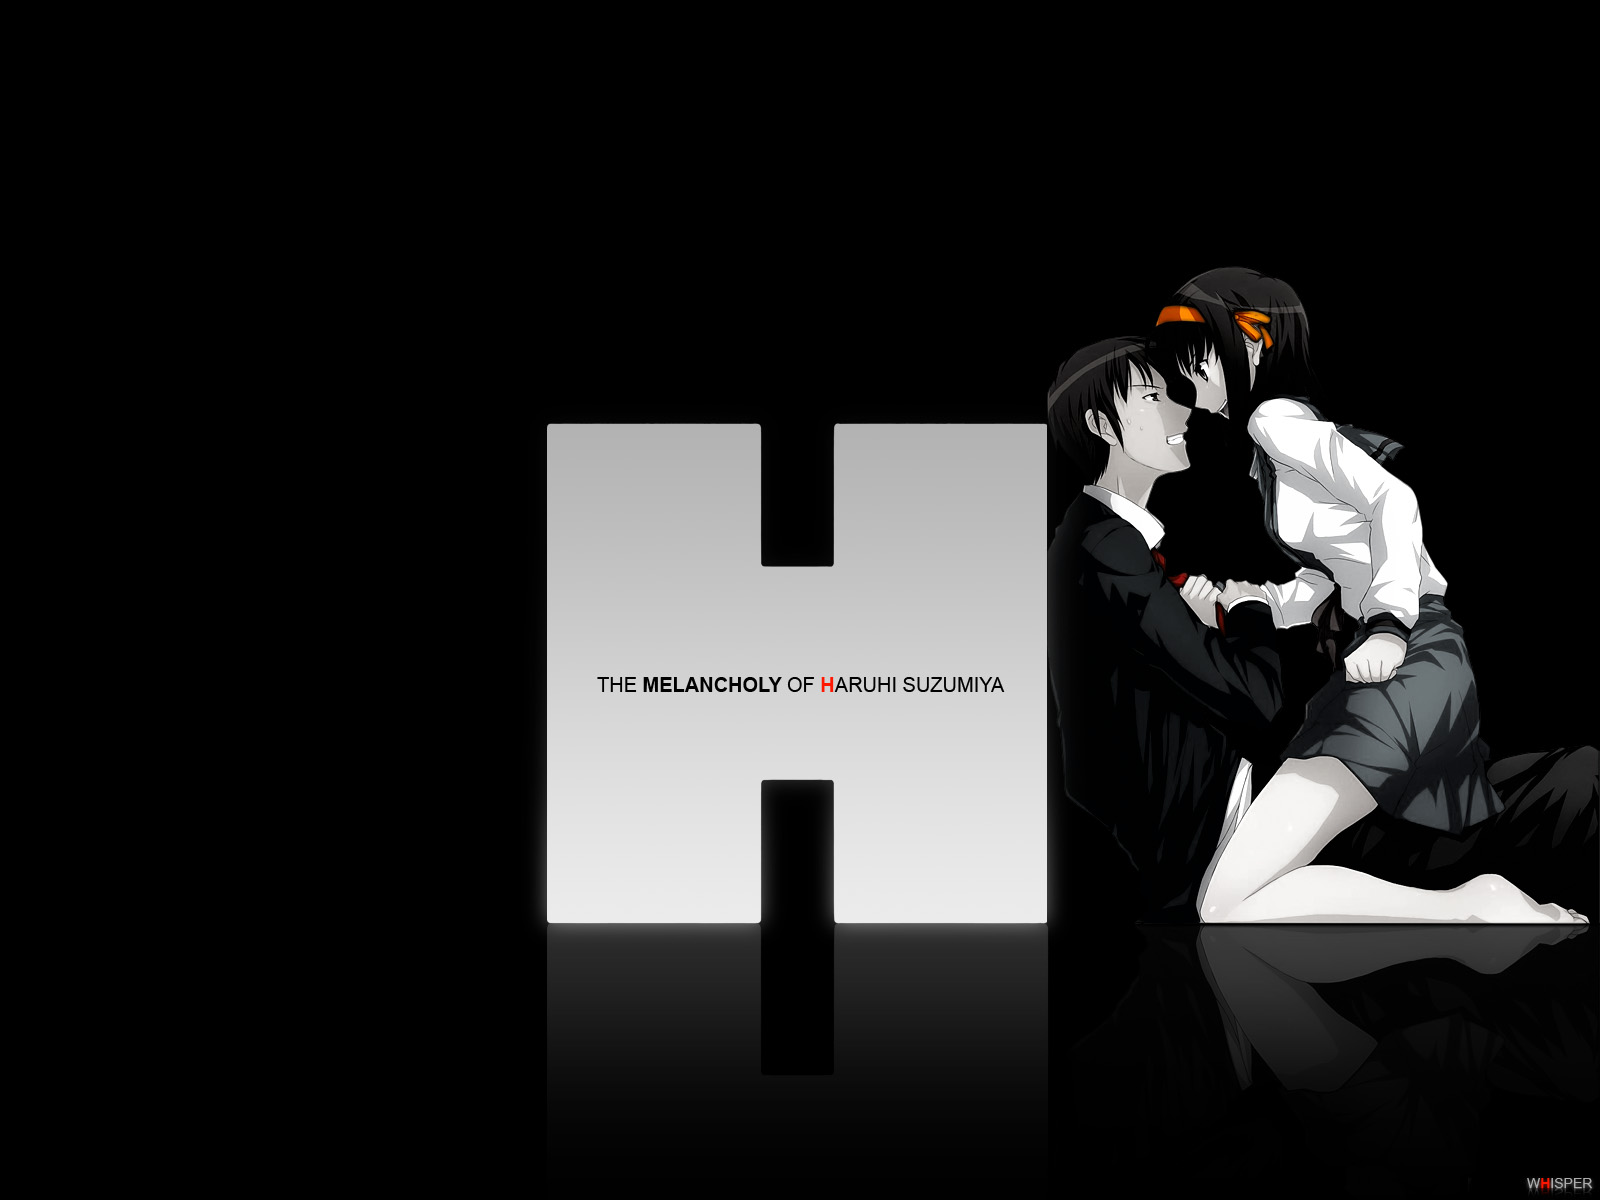 As opposed to the previous Haruhi wallpaper 